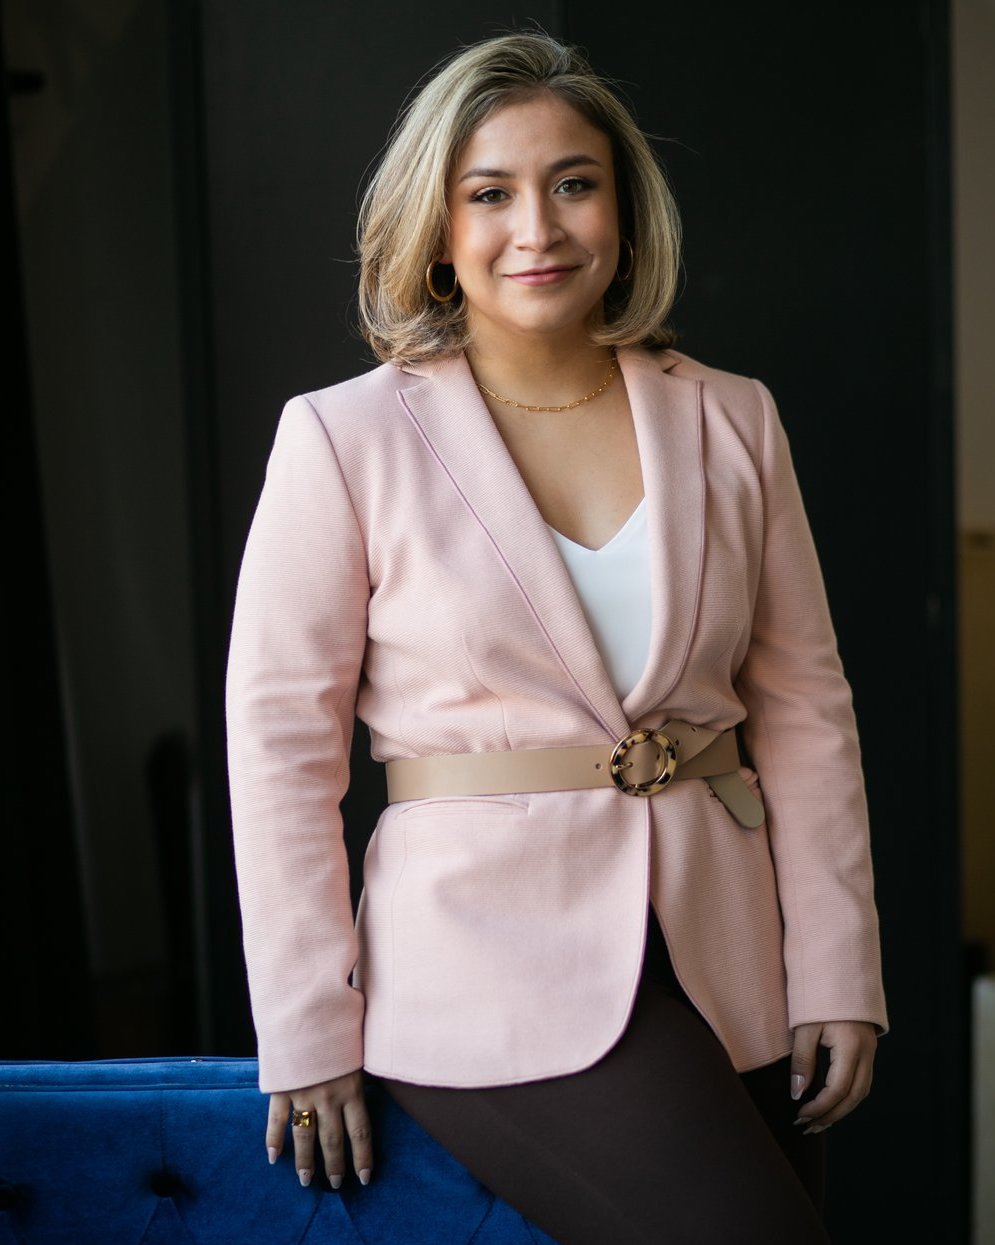 A photo of Dior Vargas, a light-skinned Latina woman with short blonde hair wearing black pants, a pink blazer with a white shirt underneath and a nude belt around her waist. She is leaning against a blue couch.